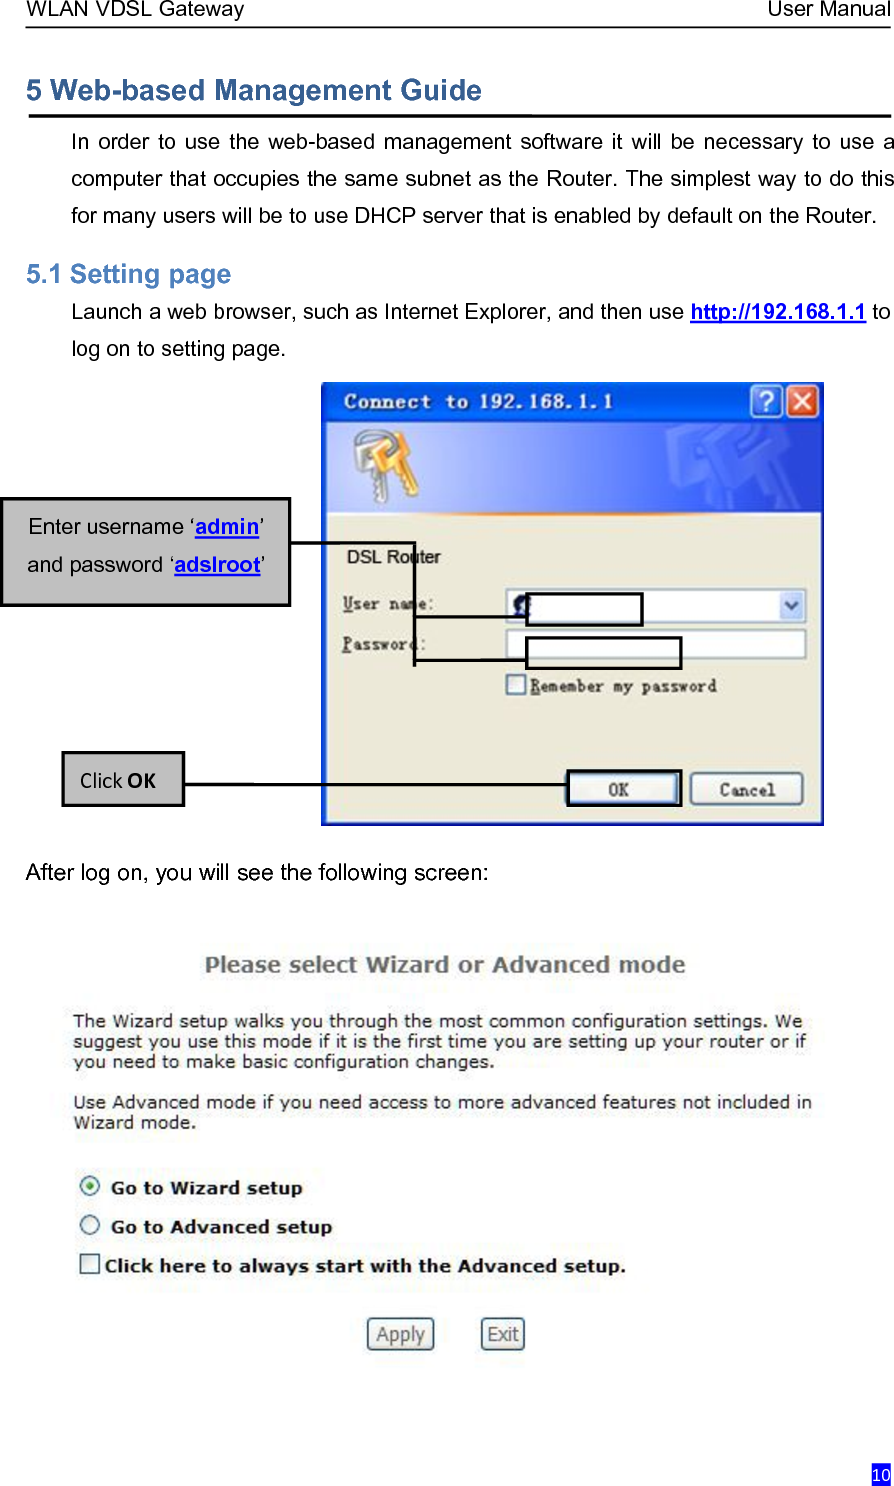 WLAN VDSL Gateway User Manual105 Web-based Management GuideIn order to use the web-based management software it will be necessary to use acomputer that occupies the same subnet as the Router. The simplest way to do thisfor many users will be to use DHCP server that is enabled by default on the Router.5.1 Setting pageLaunch a web browser, such as Internet Explorer, and then use http://192.168.1.1 tolog on to setting page.After log on, you will see the following screen:Click OKEnter username ‘admin’and password ‘adslroot’